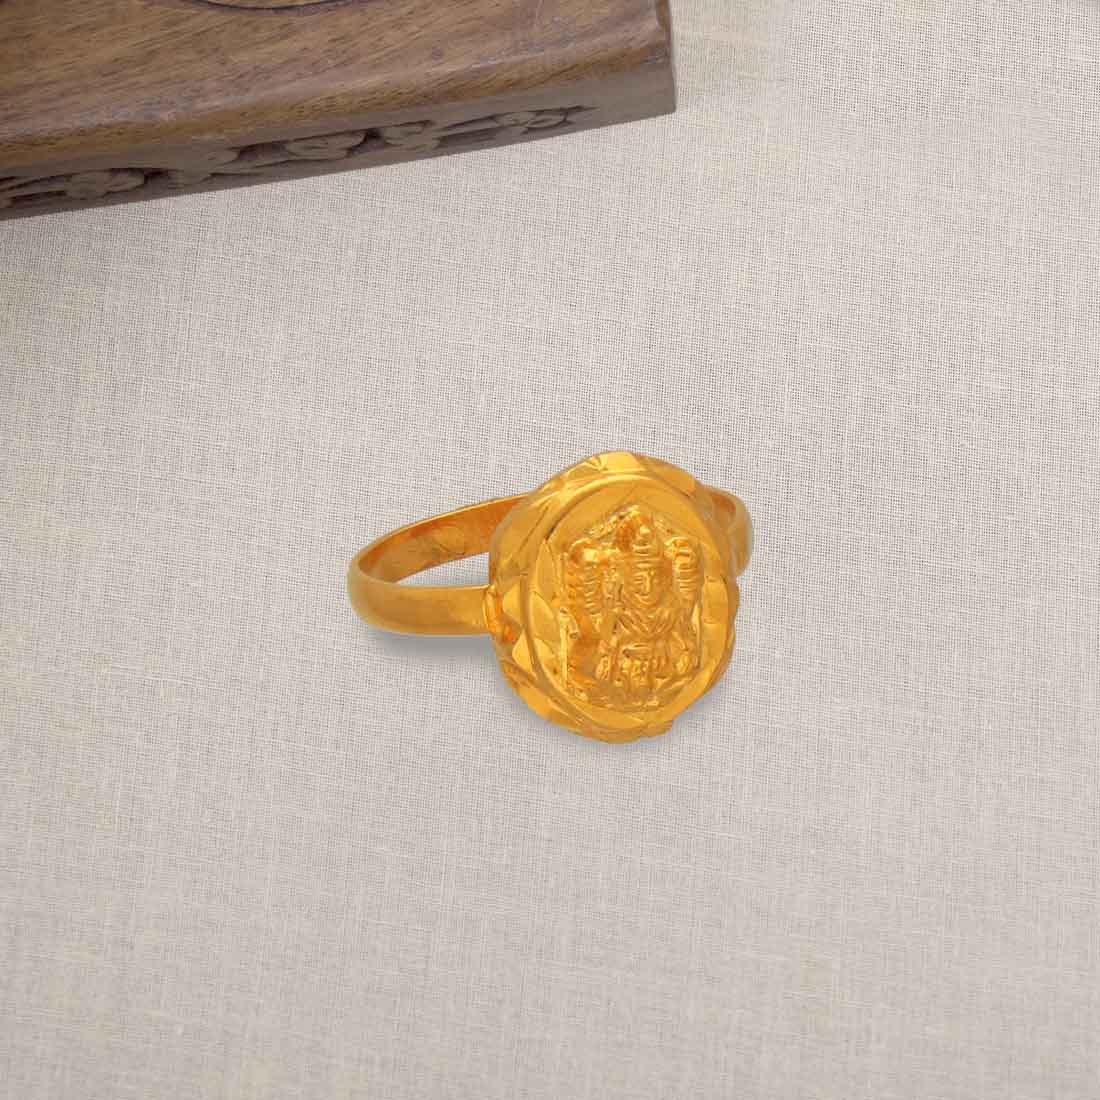 Lakshmi devi ring weighing 4 grams gold | Gold bracelet simple, Gold chain  design, Gold jewelry simple